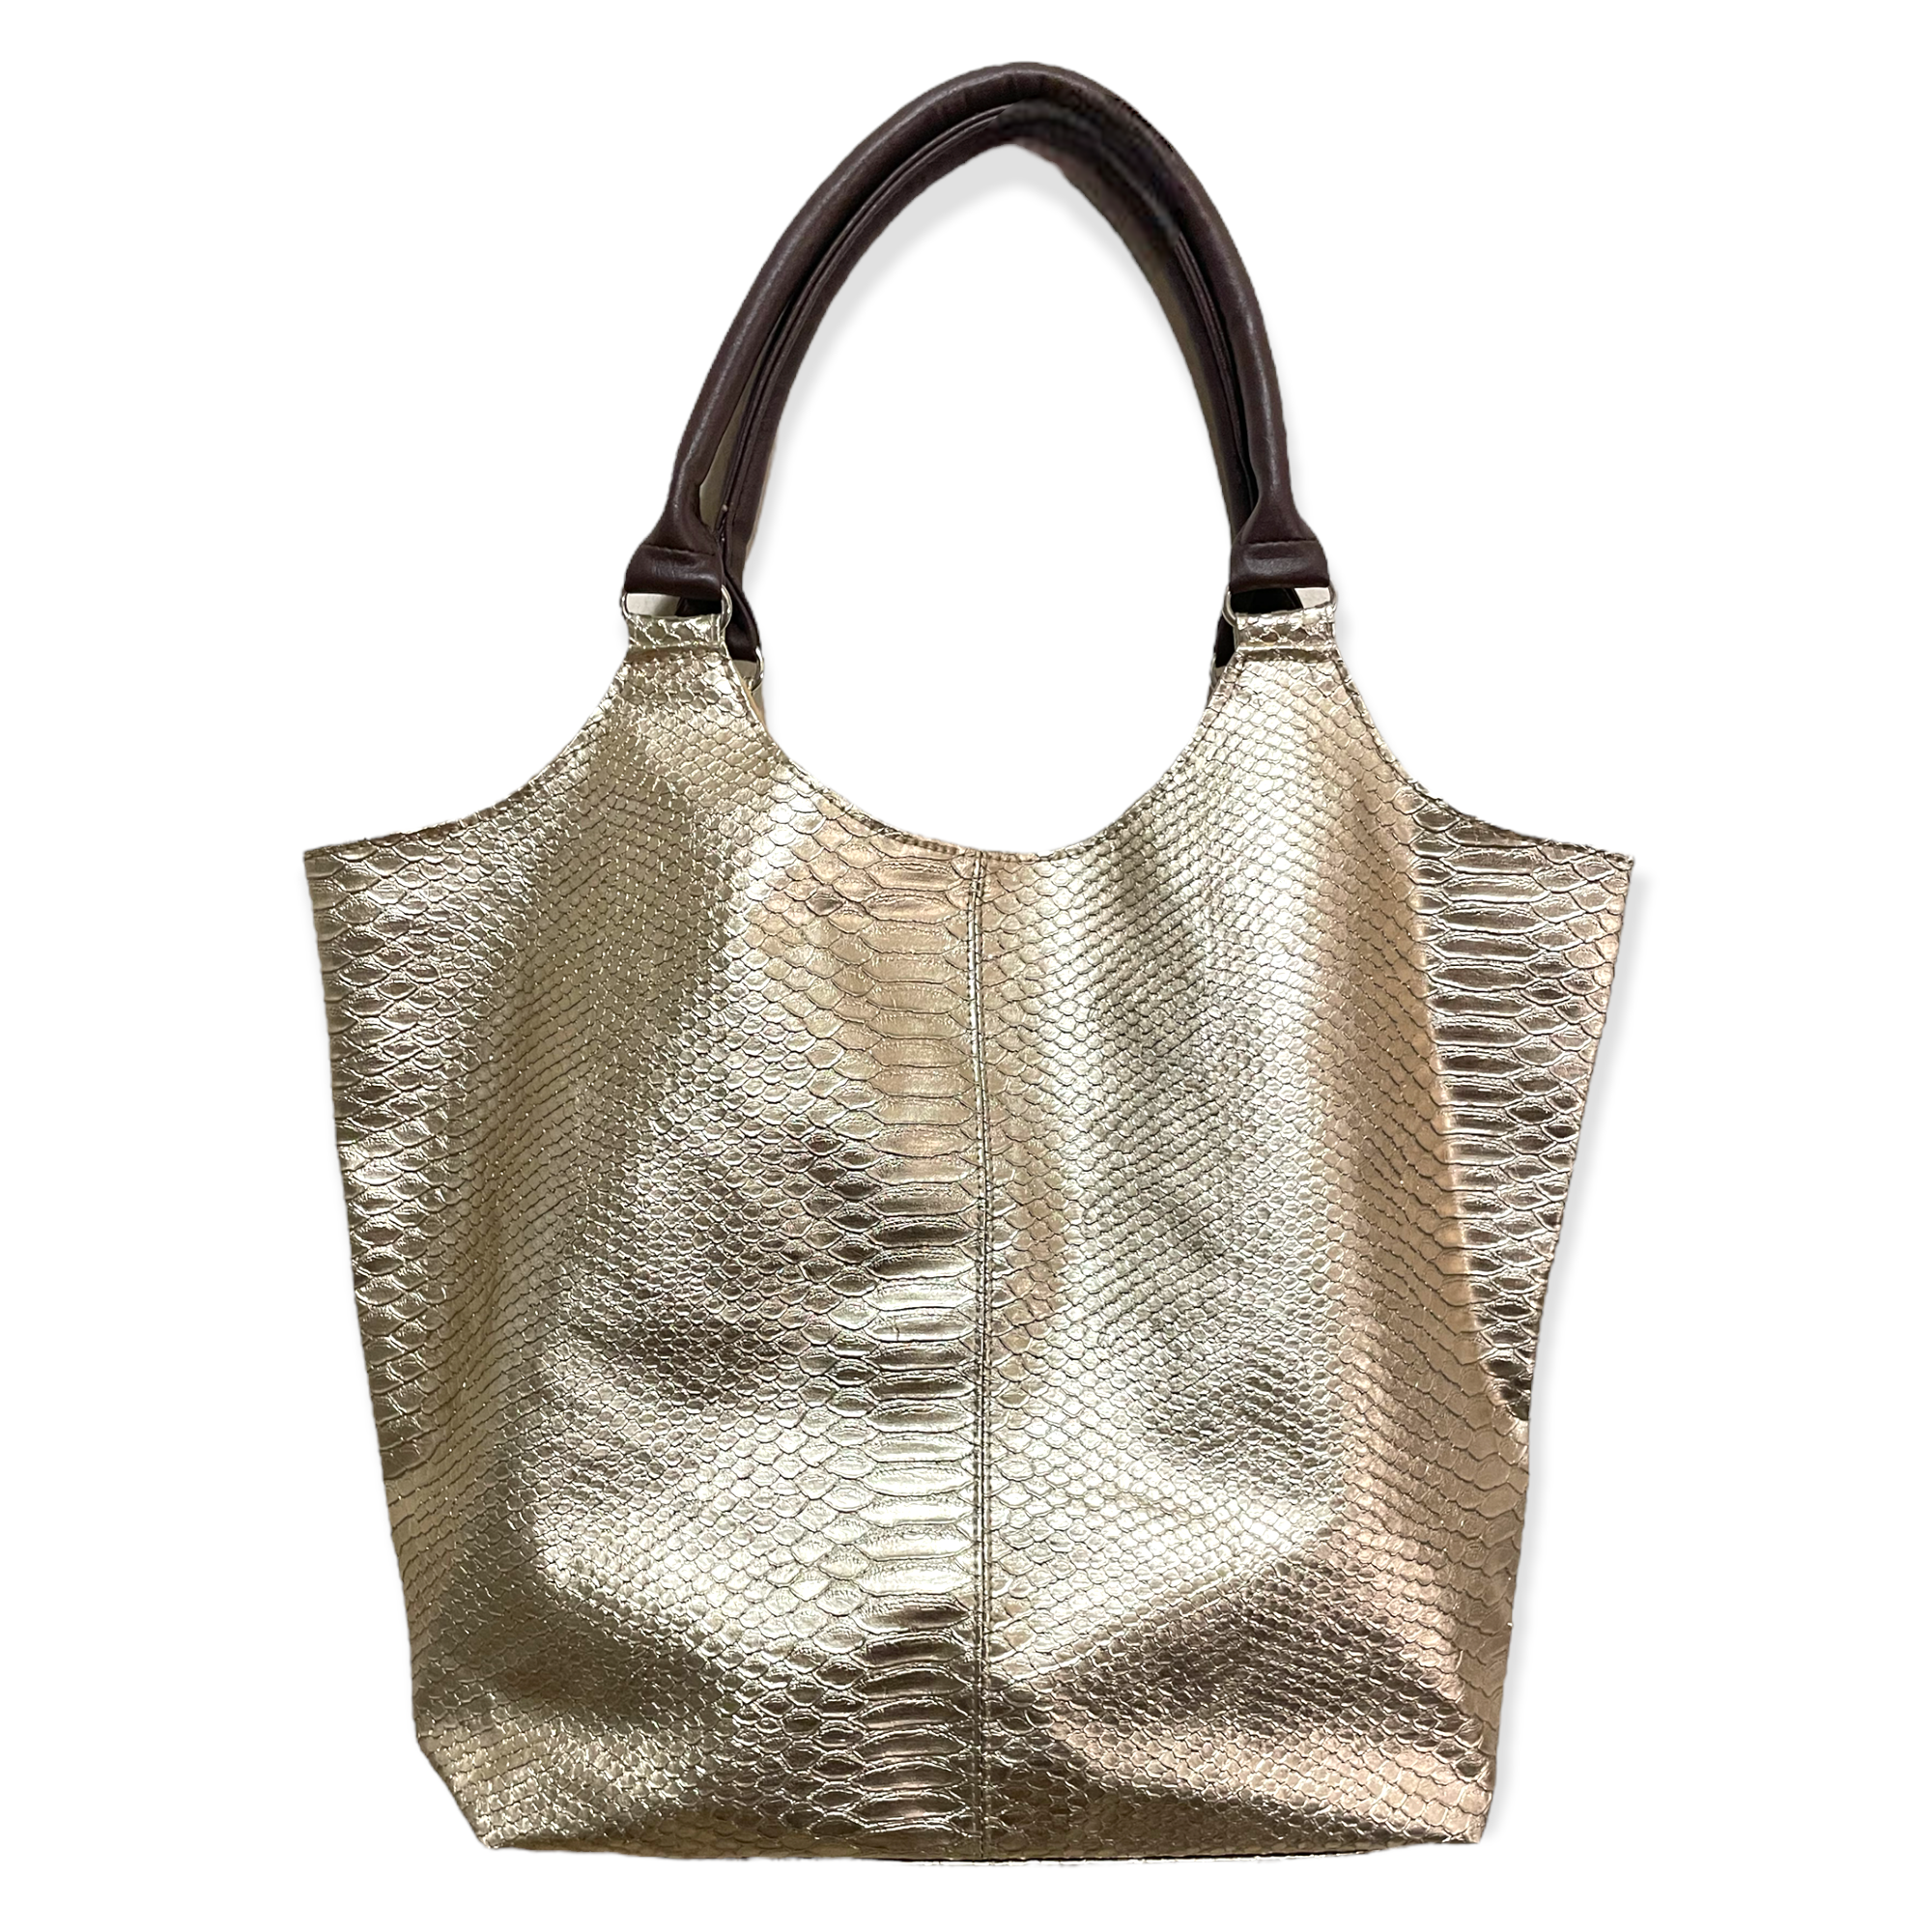 NEIMAN MARCUS Gold Python Embossed Tote